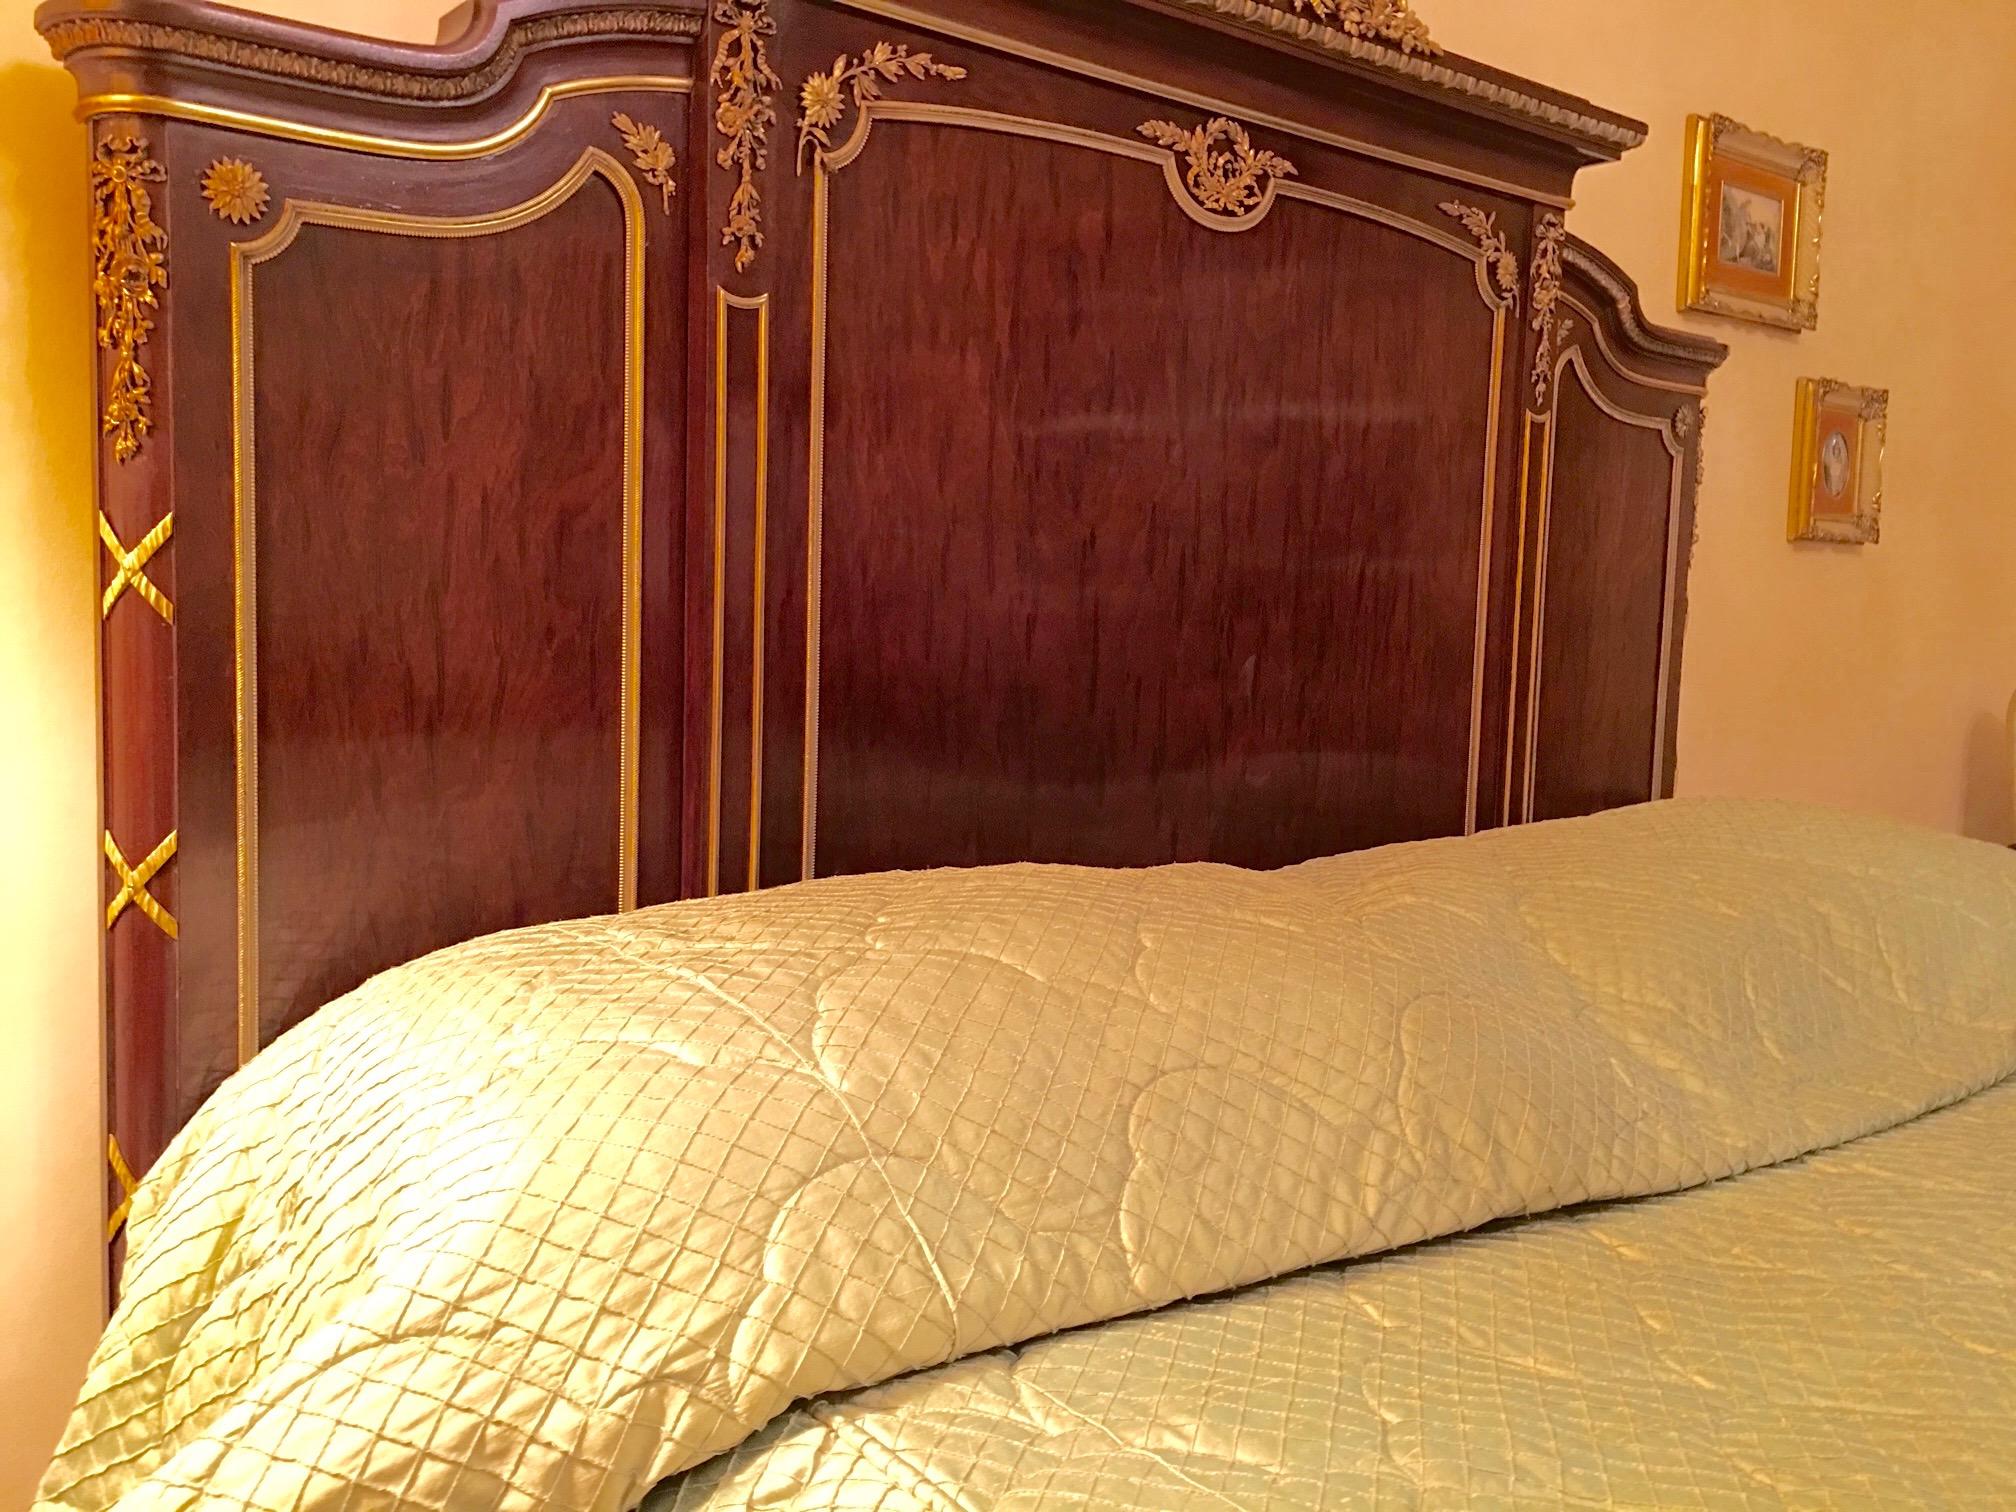 Superior craftsmanship and elegant adornment characterize this exceptional European queen size bed by Francois Linke in the Marie Antoinette Revival style. The bed has a breakfront headboard with a gilt bronze floral garland, ribbon bow and floral